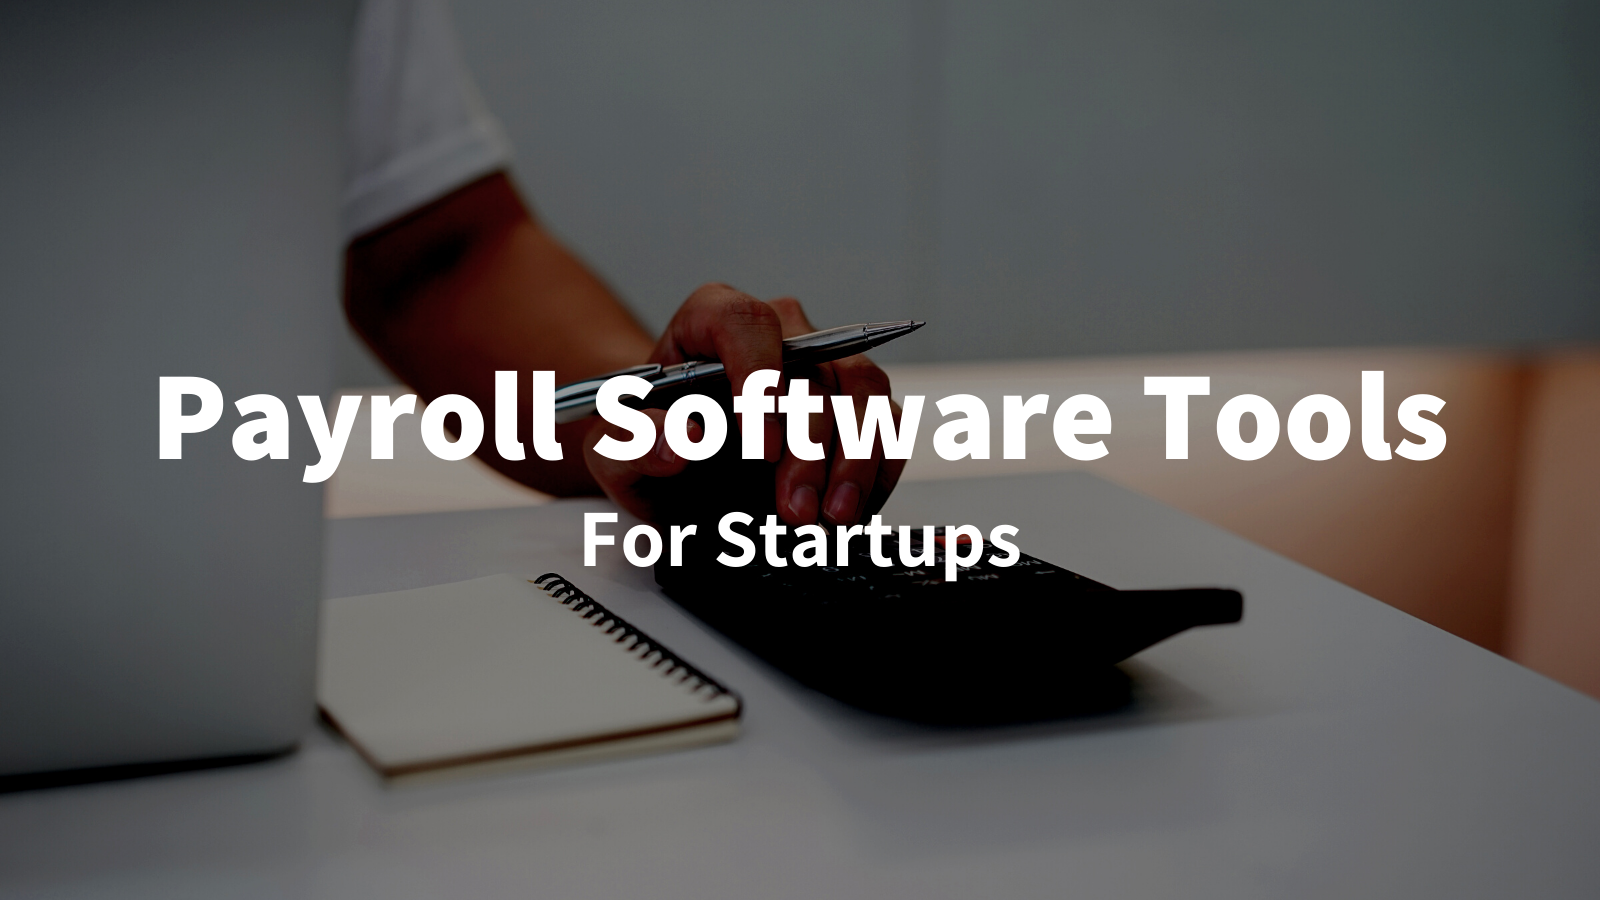 The 11 Best Payroll Software Tools for Startups